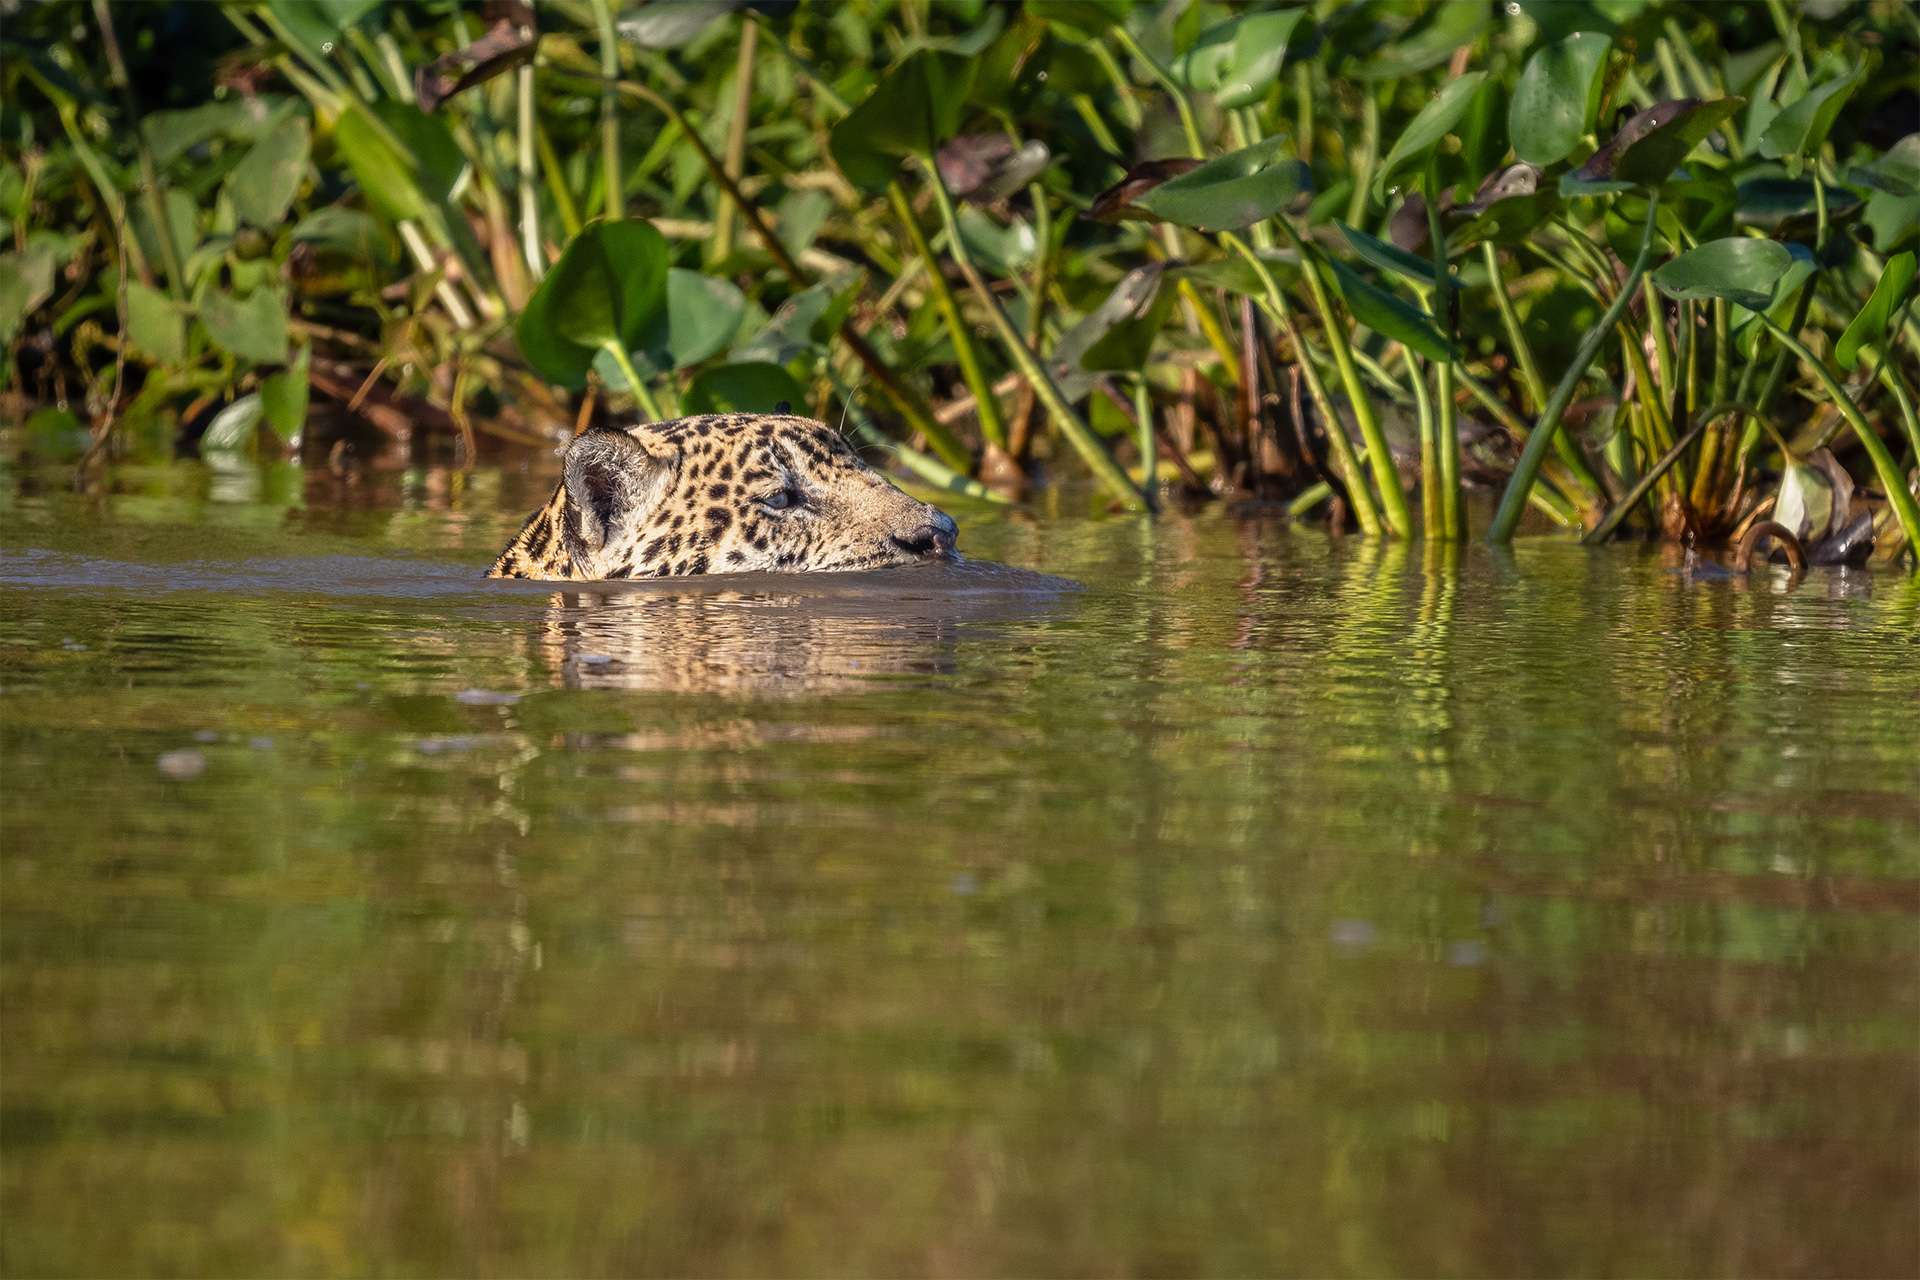 Northern Pantanal on a tributary of the Cuiba River